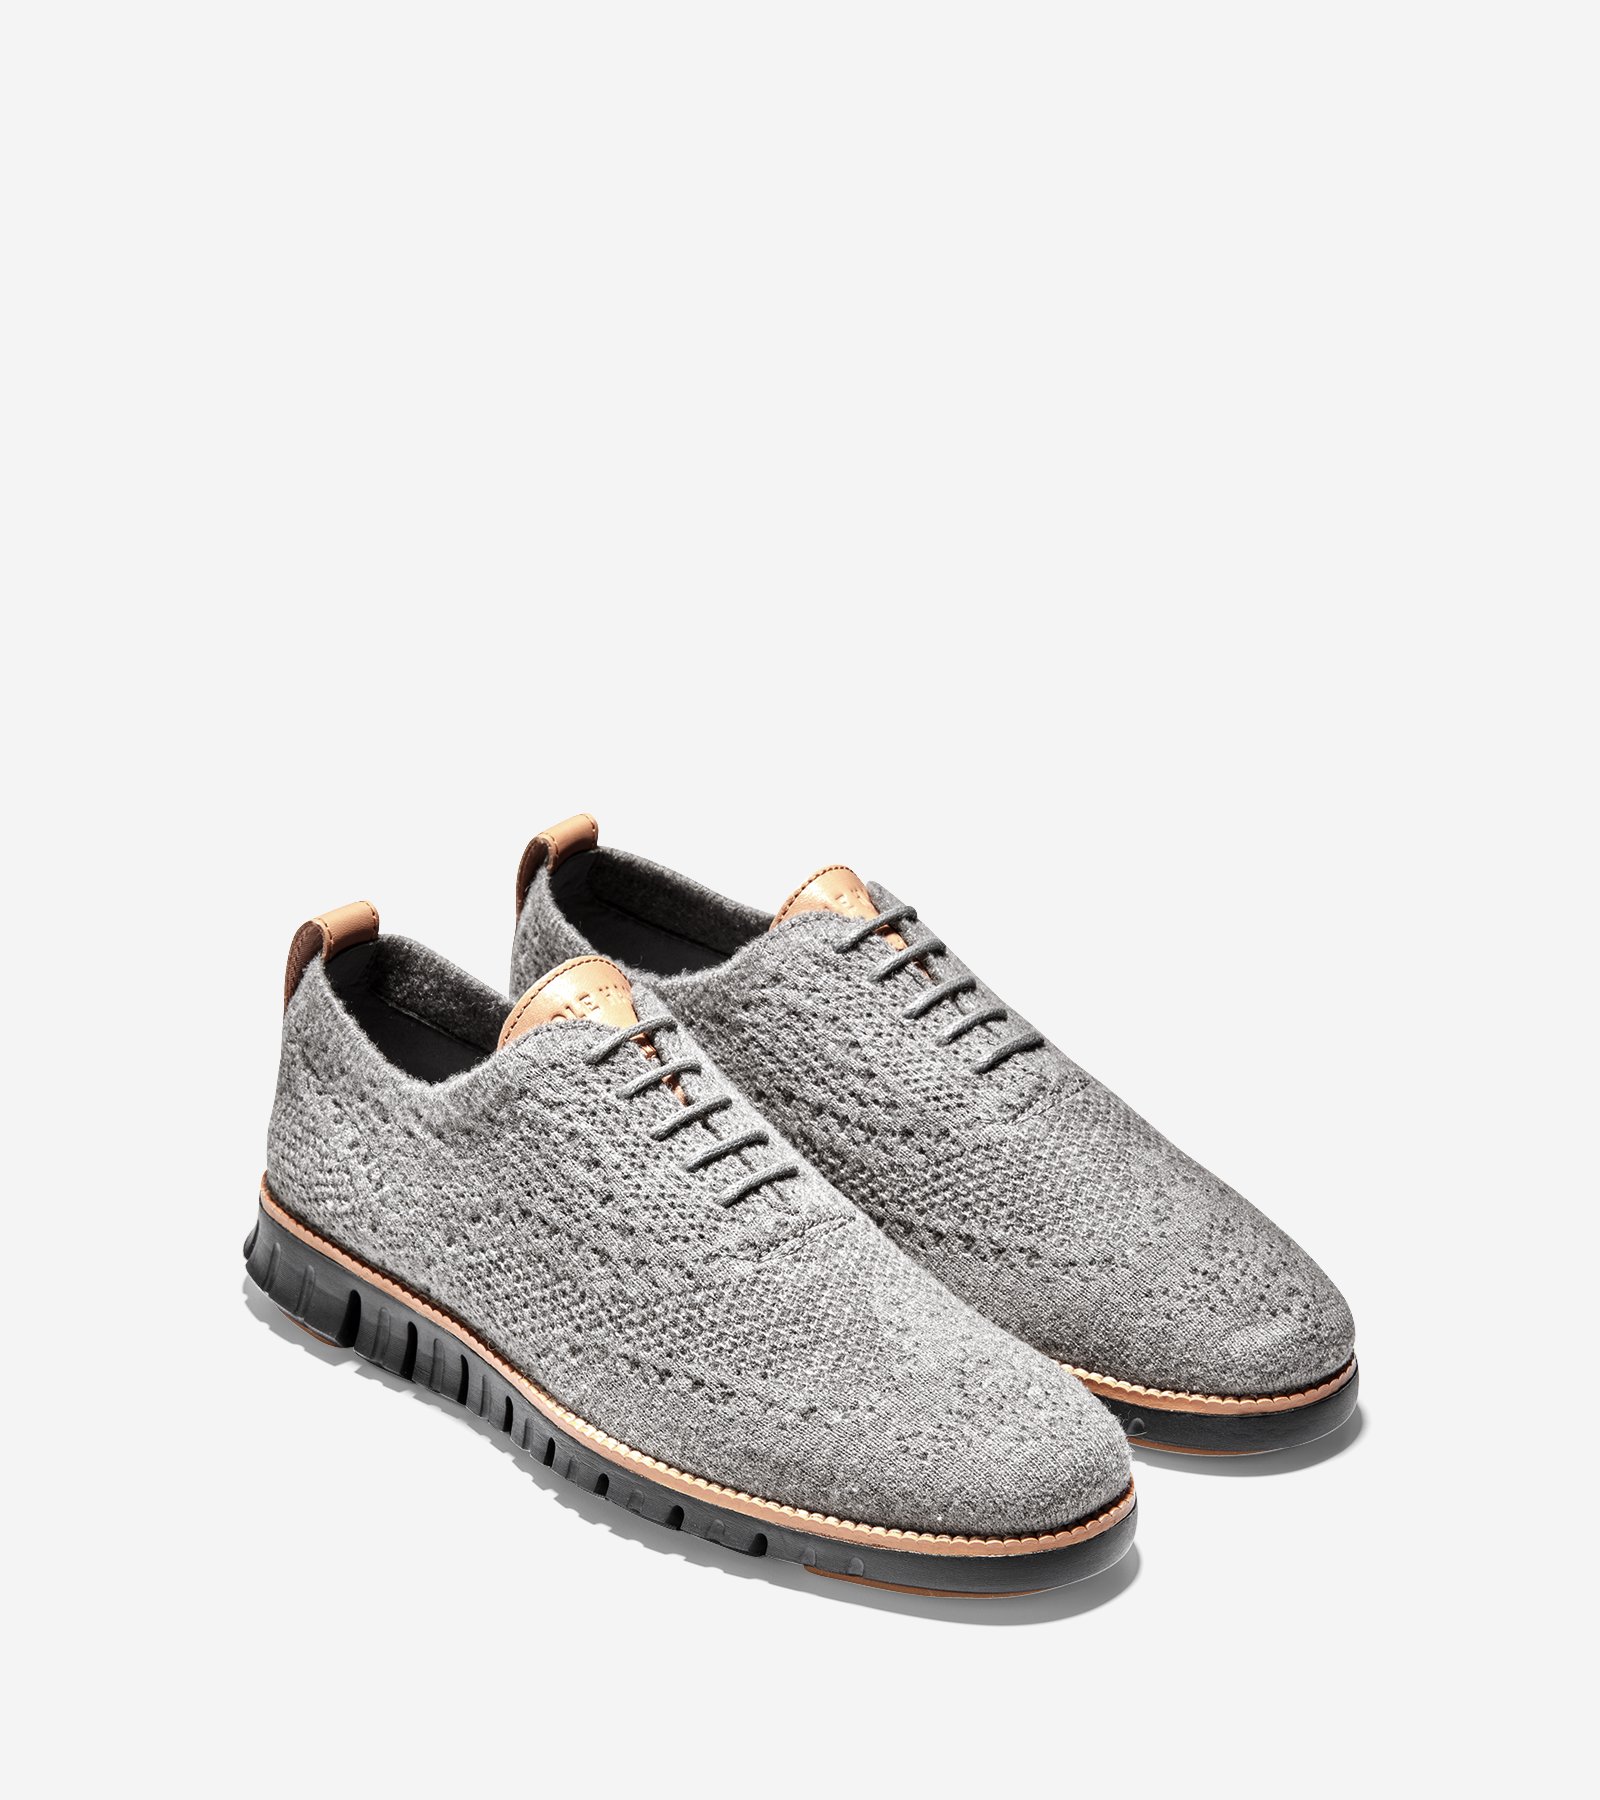 Cole Haan Introduces ZERØGRAND with 